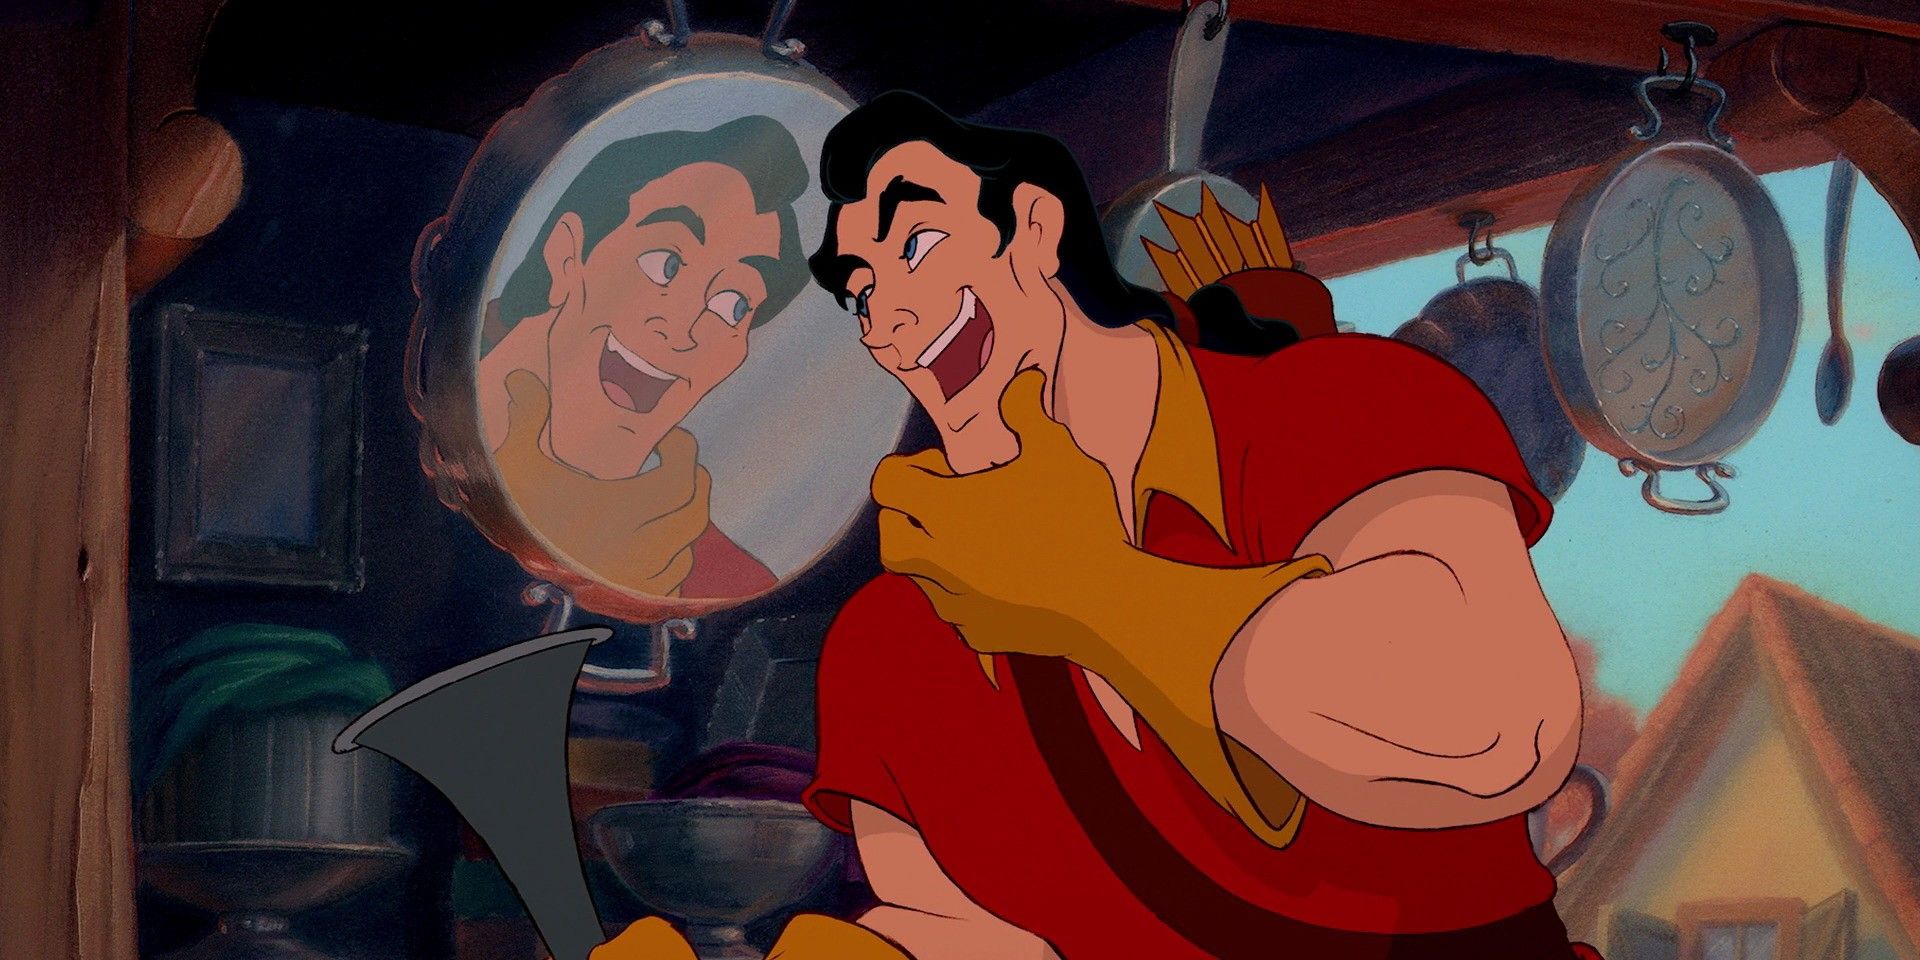 Gaston from Disney's Beauty and the Beast